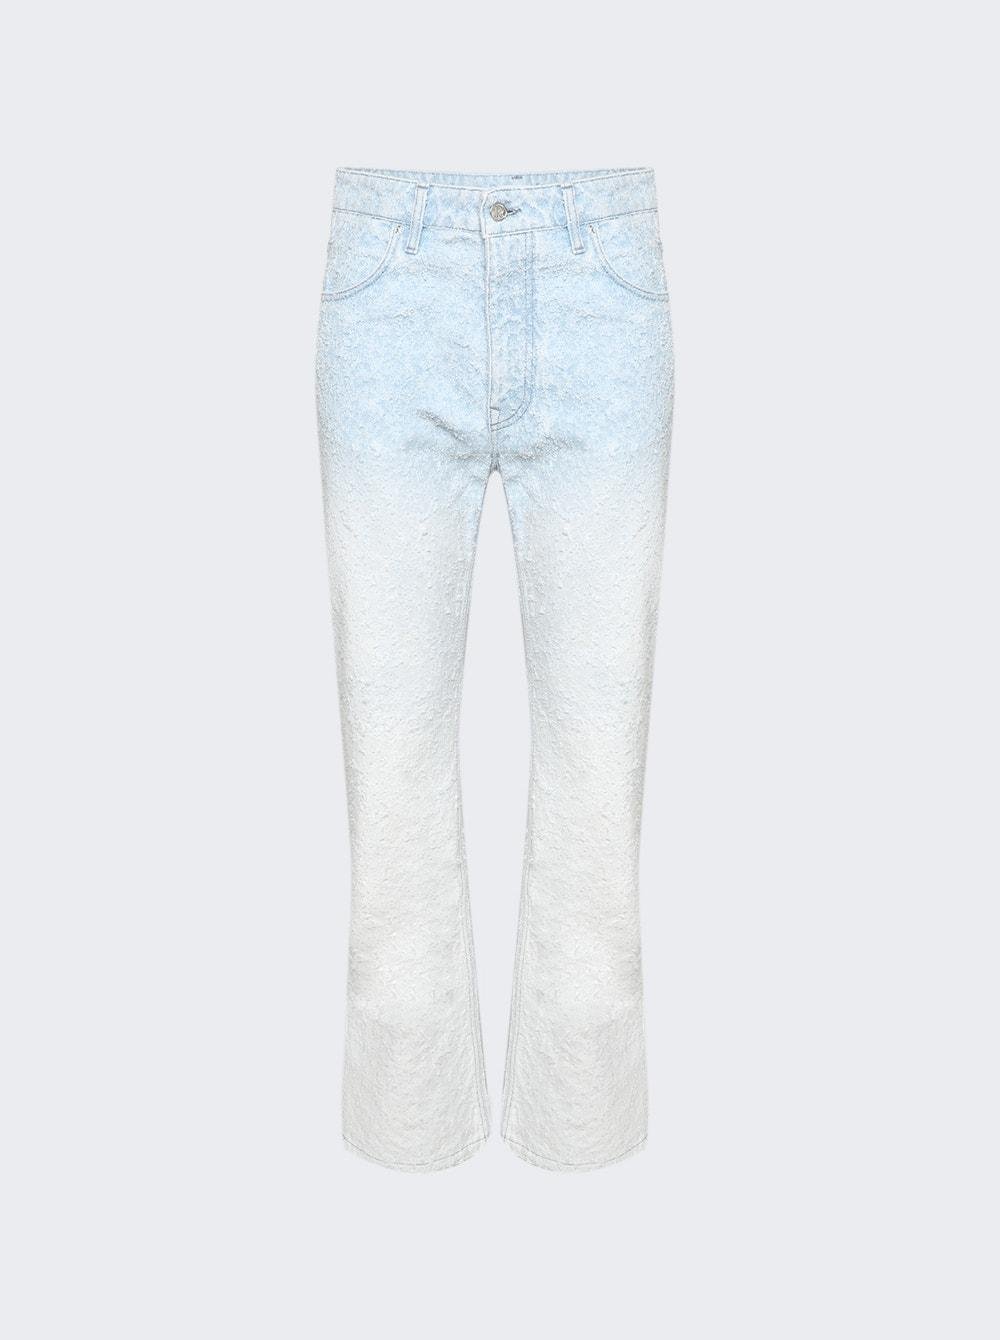 Scratched Raw Jeans Denim Light Blue  | The Webster by RABANNE